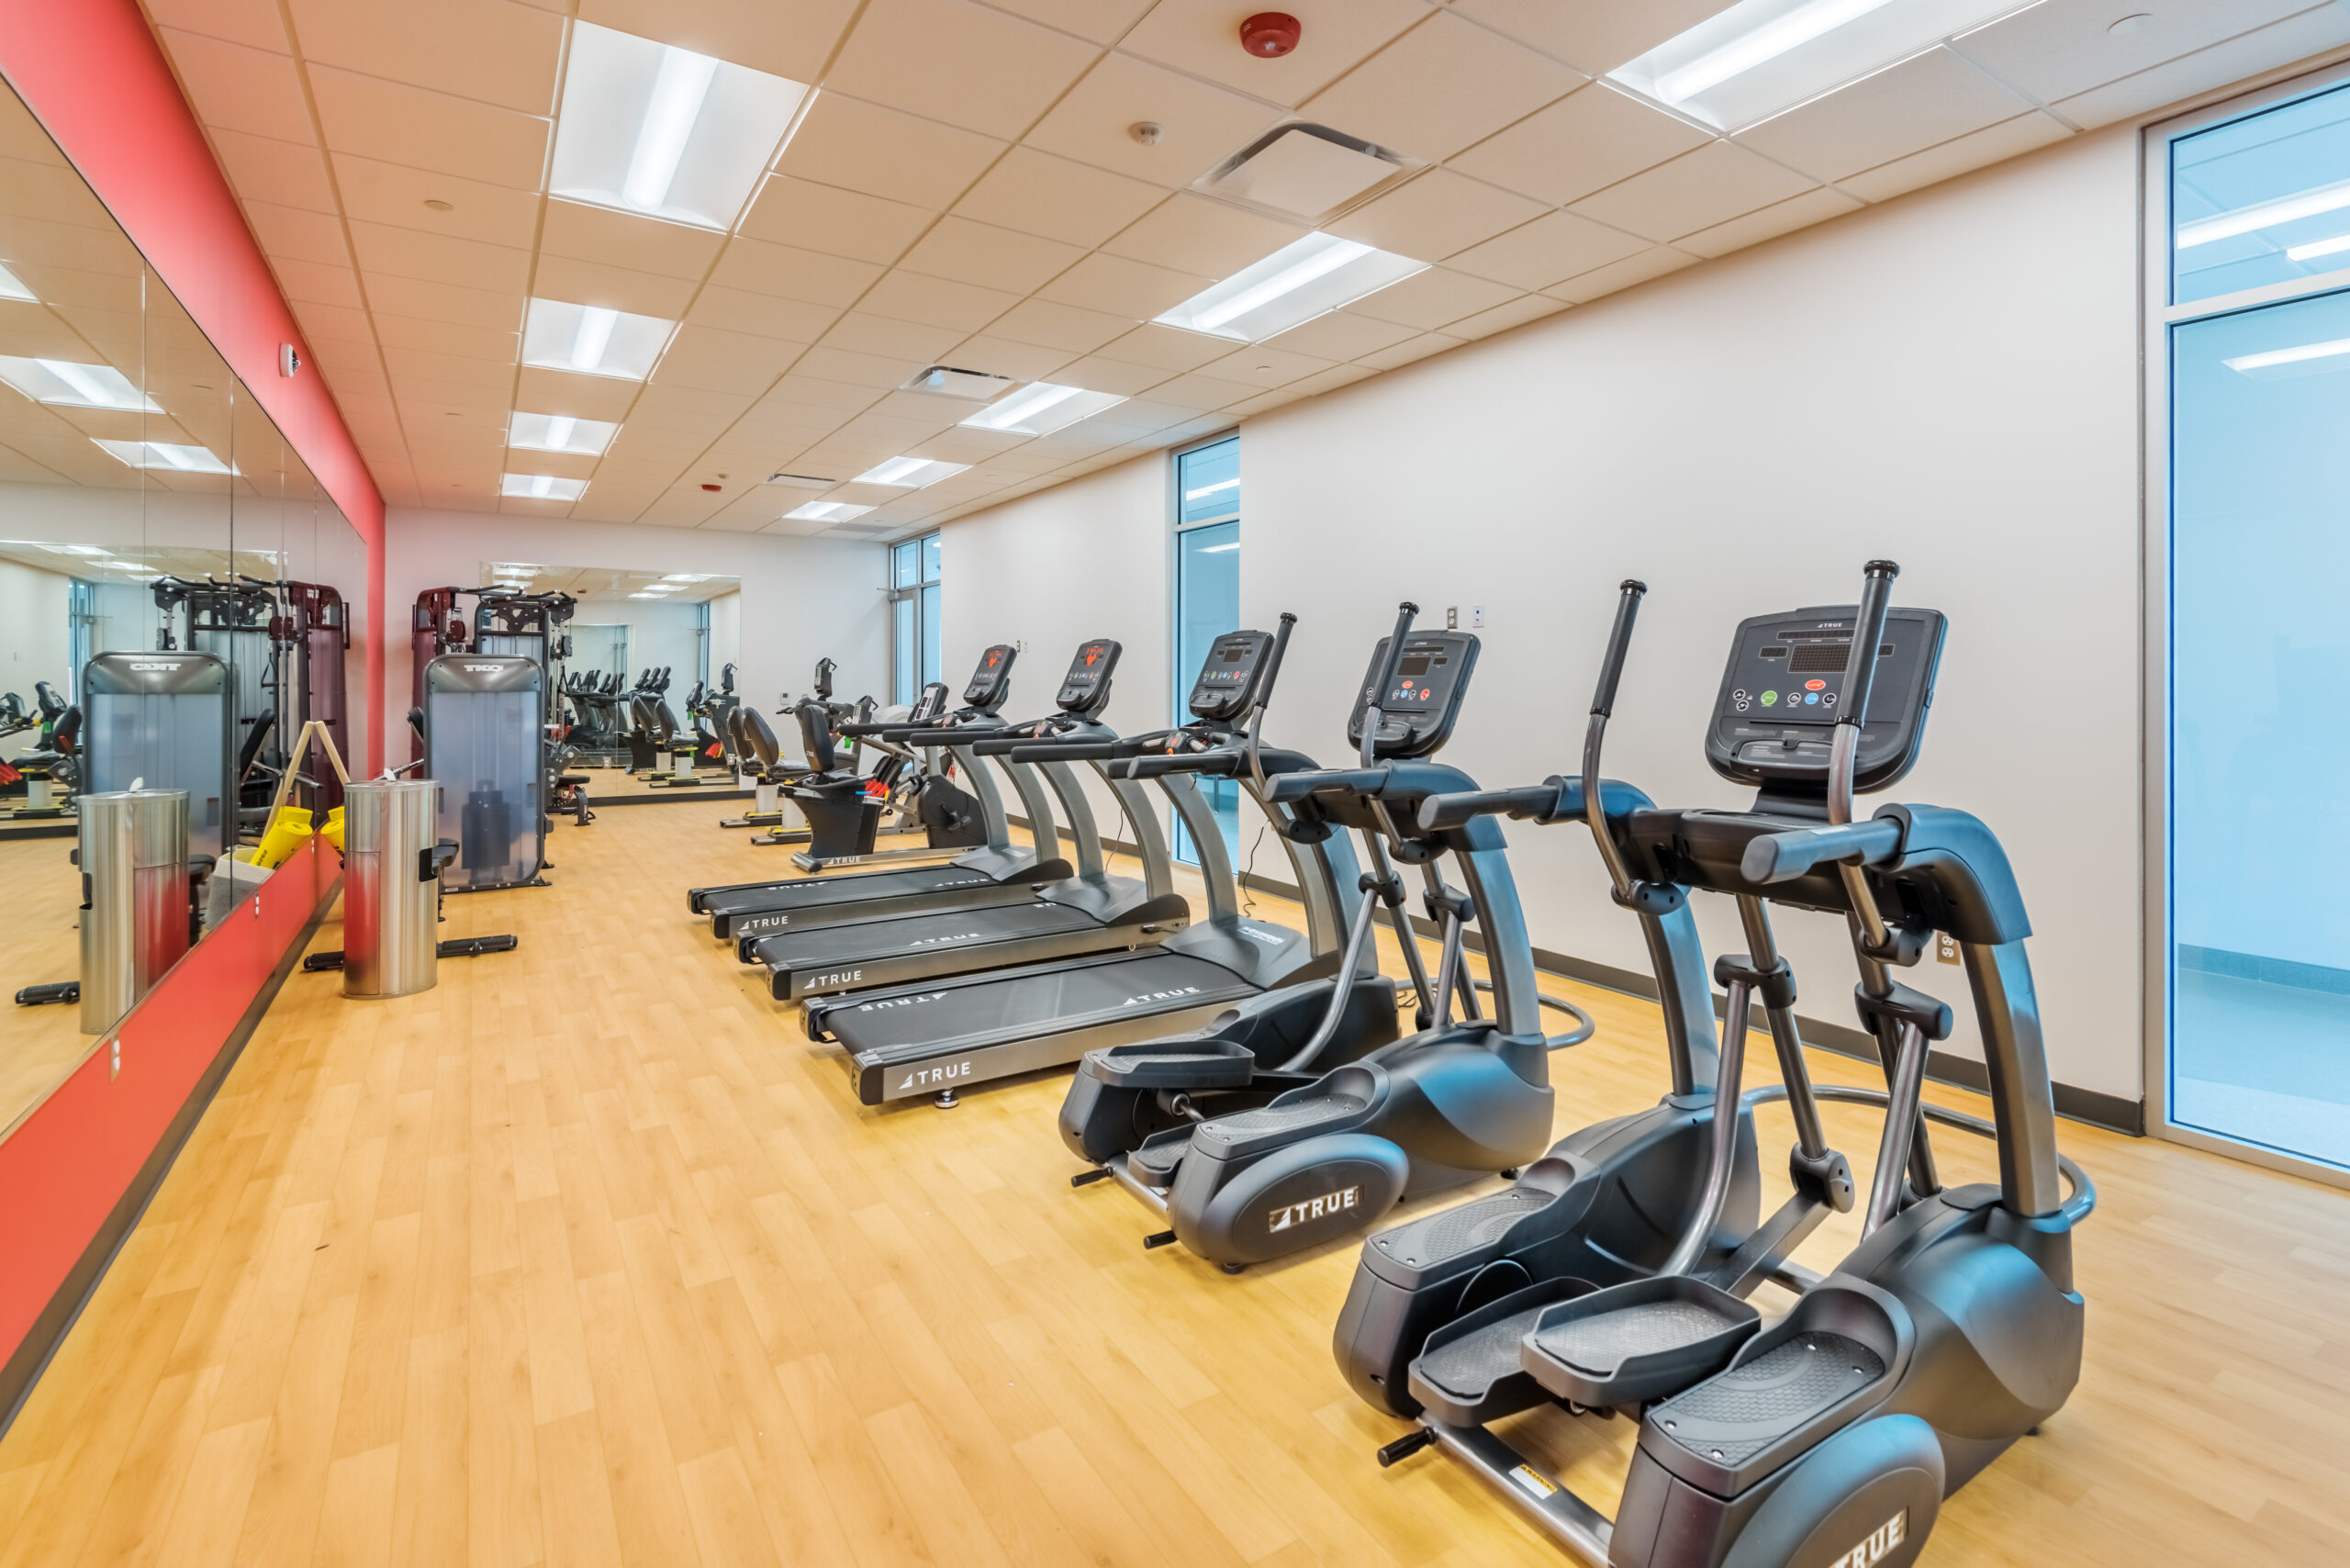 Apex Senior Center Fitness Room with Ellipticals, Treadmills, and Large Wall Mirrors